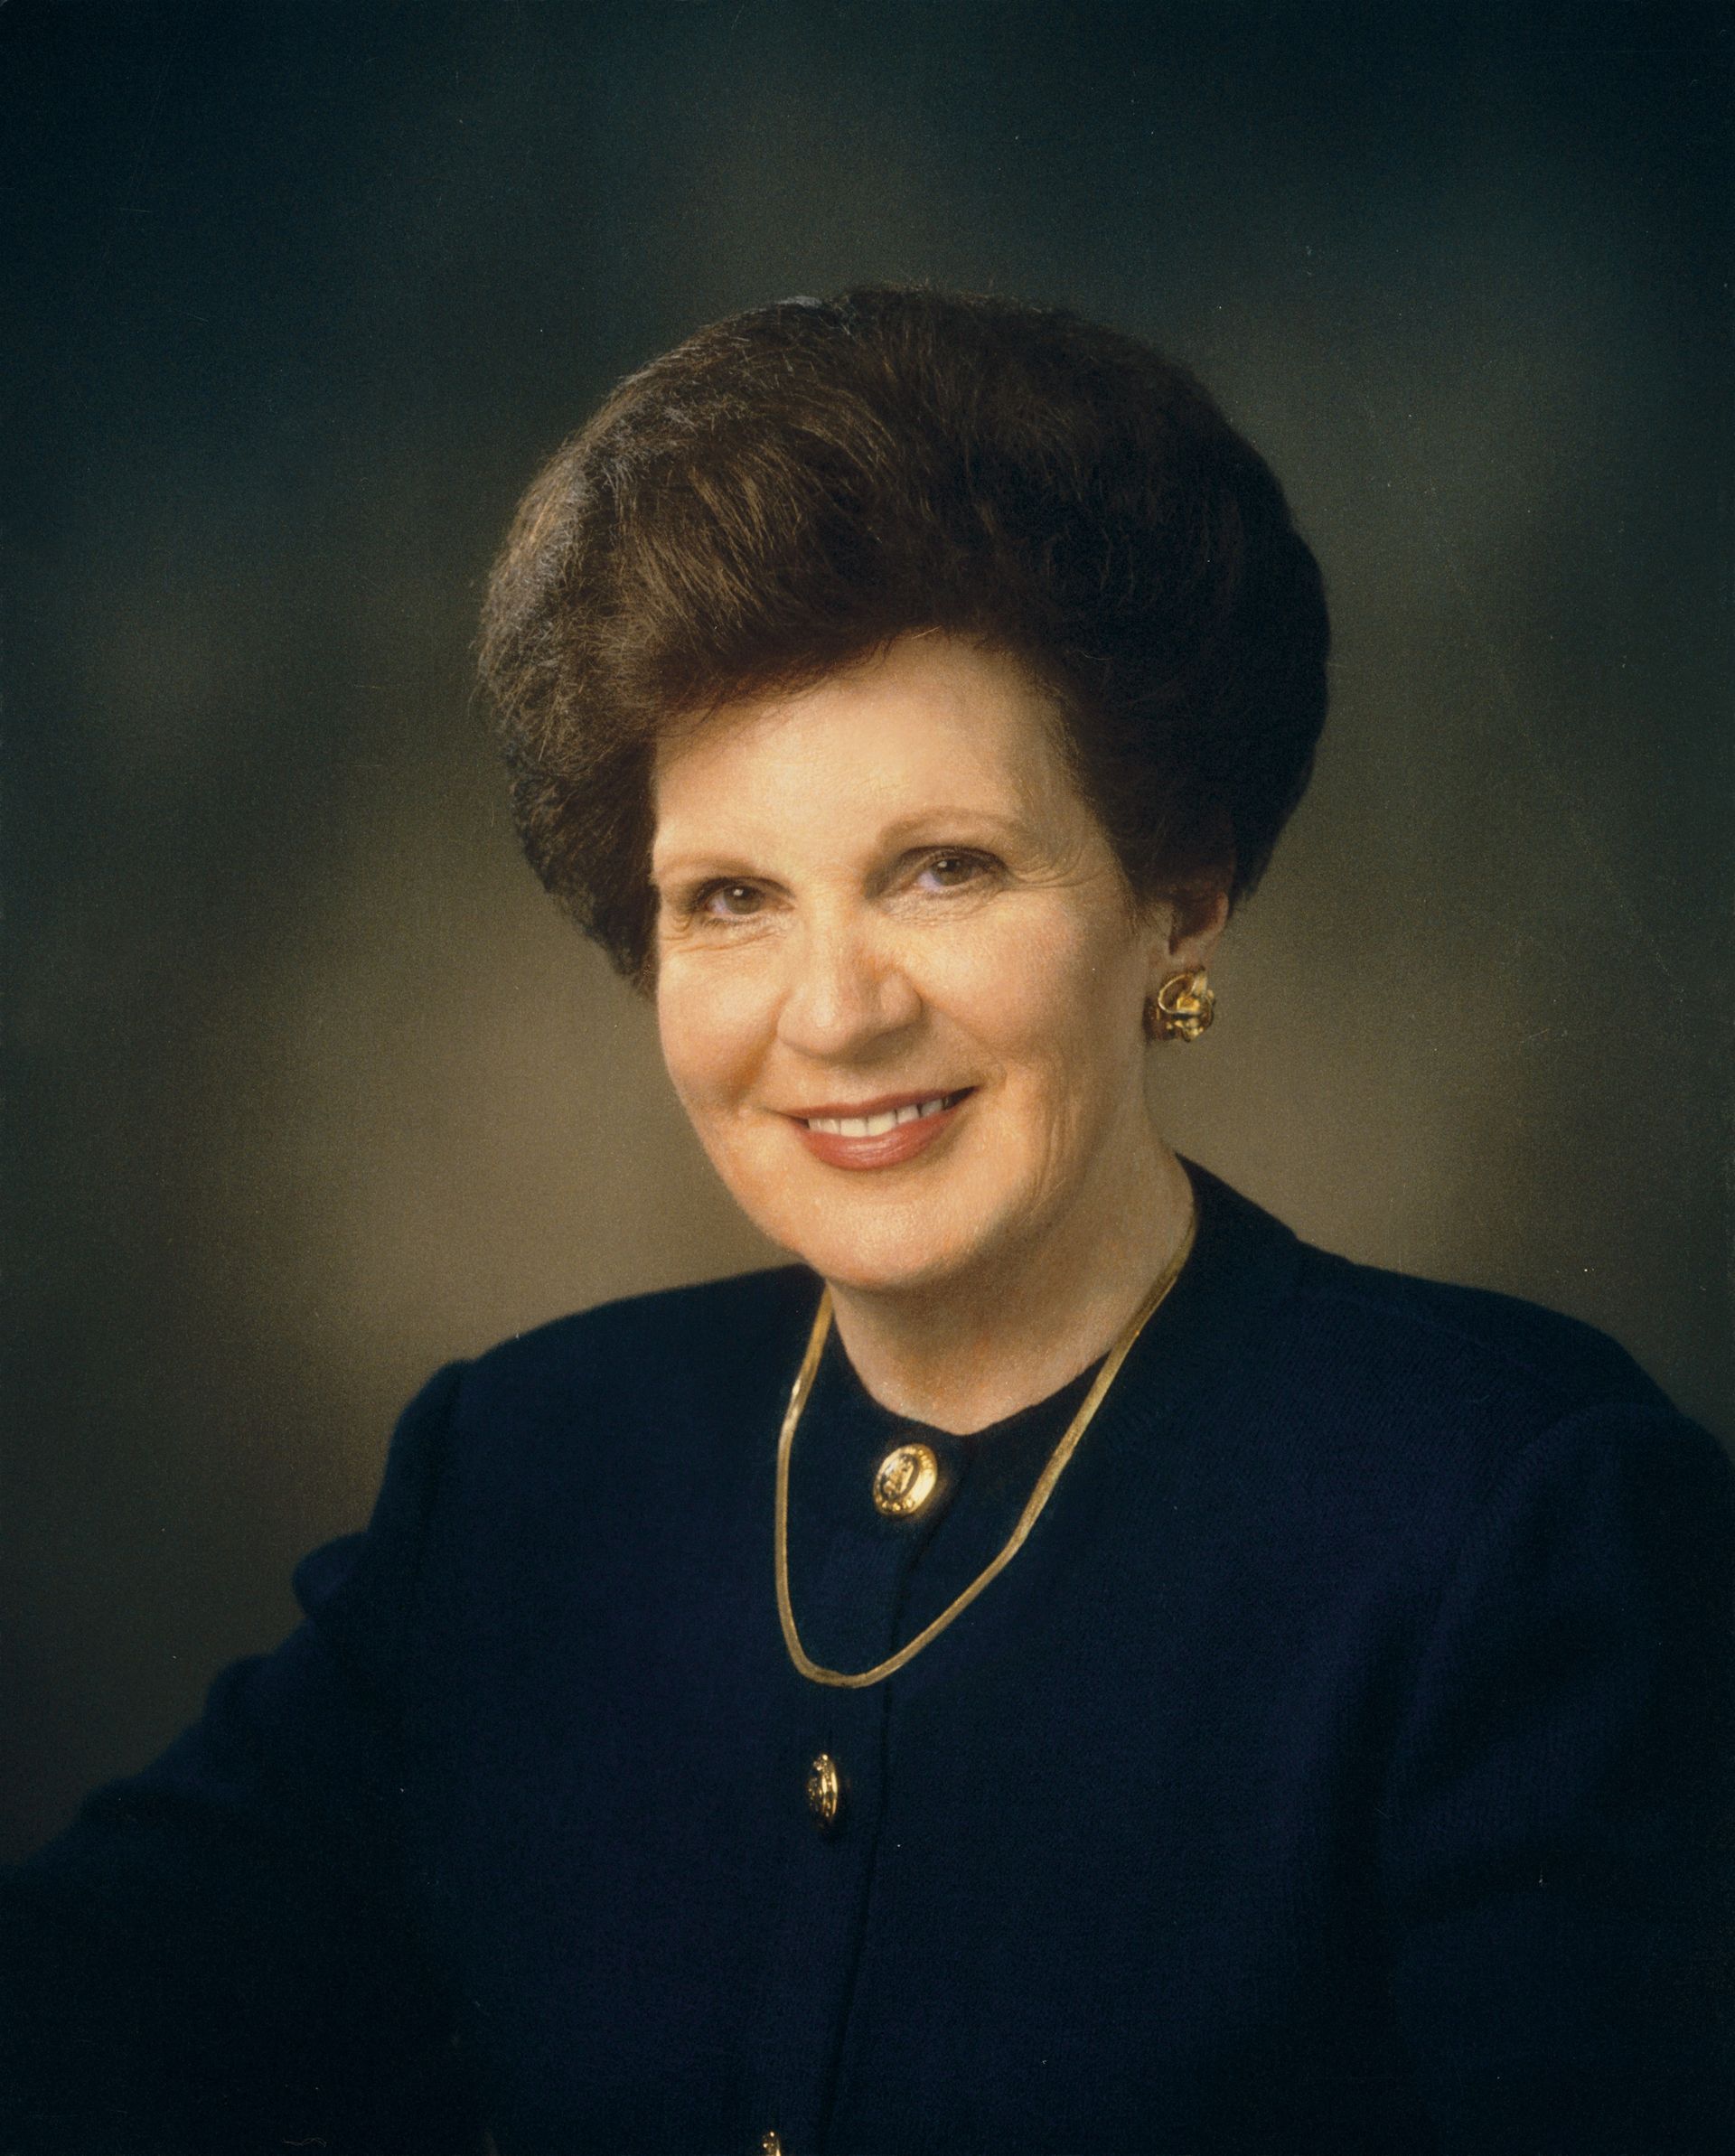 A portrait of Mary Ellen Wood Smoot, who served as the 13th general president of the Relief Society from 1997 to 2002.